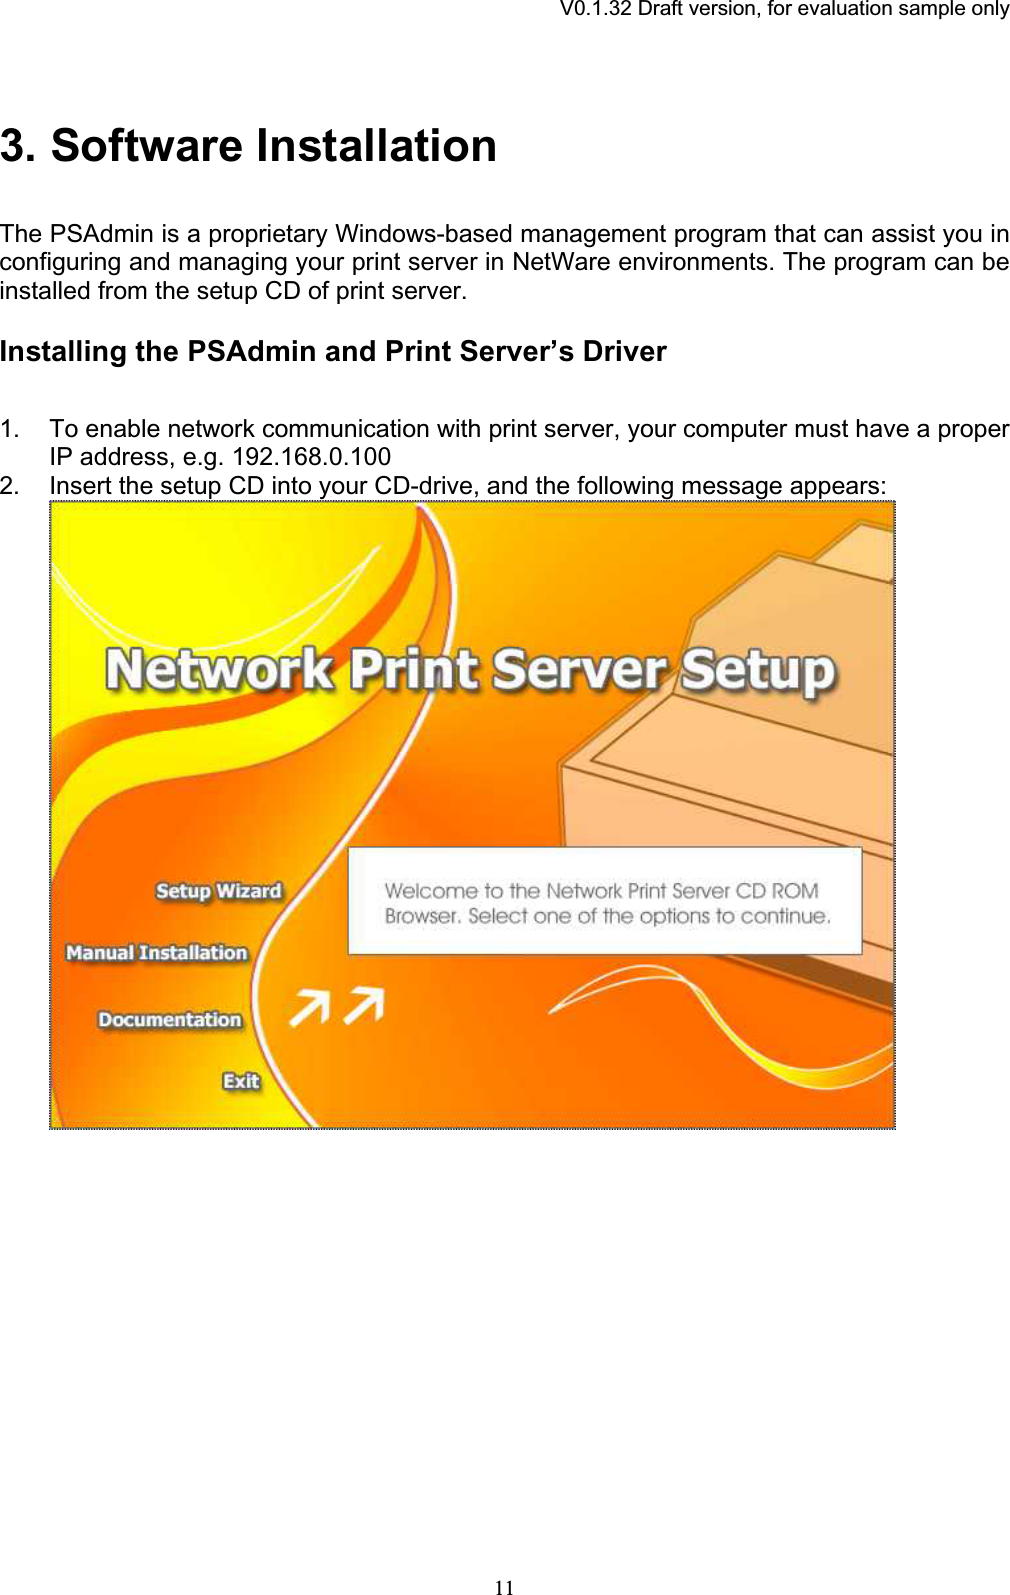 V0.1.32 Draft version, for evaluation sample only3. Software InstallationThe PSAdmin is a proprietary Windows-based management program that can assist you in configuring and managing your print server in NetWare environments. The program can be installed from the setup CD of print server. Installing the PSAdmin and Print Server’s Driver 1. To enable network communication with print server, your computer must have a proper IP address, e.g. 192.168.0.100 2. Insert the setup CD into your CD-drive, and the following message appears: 11